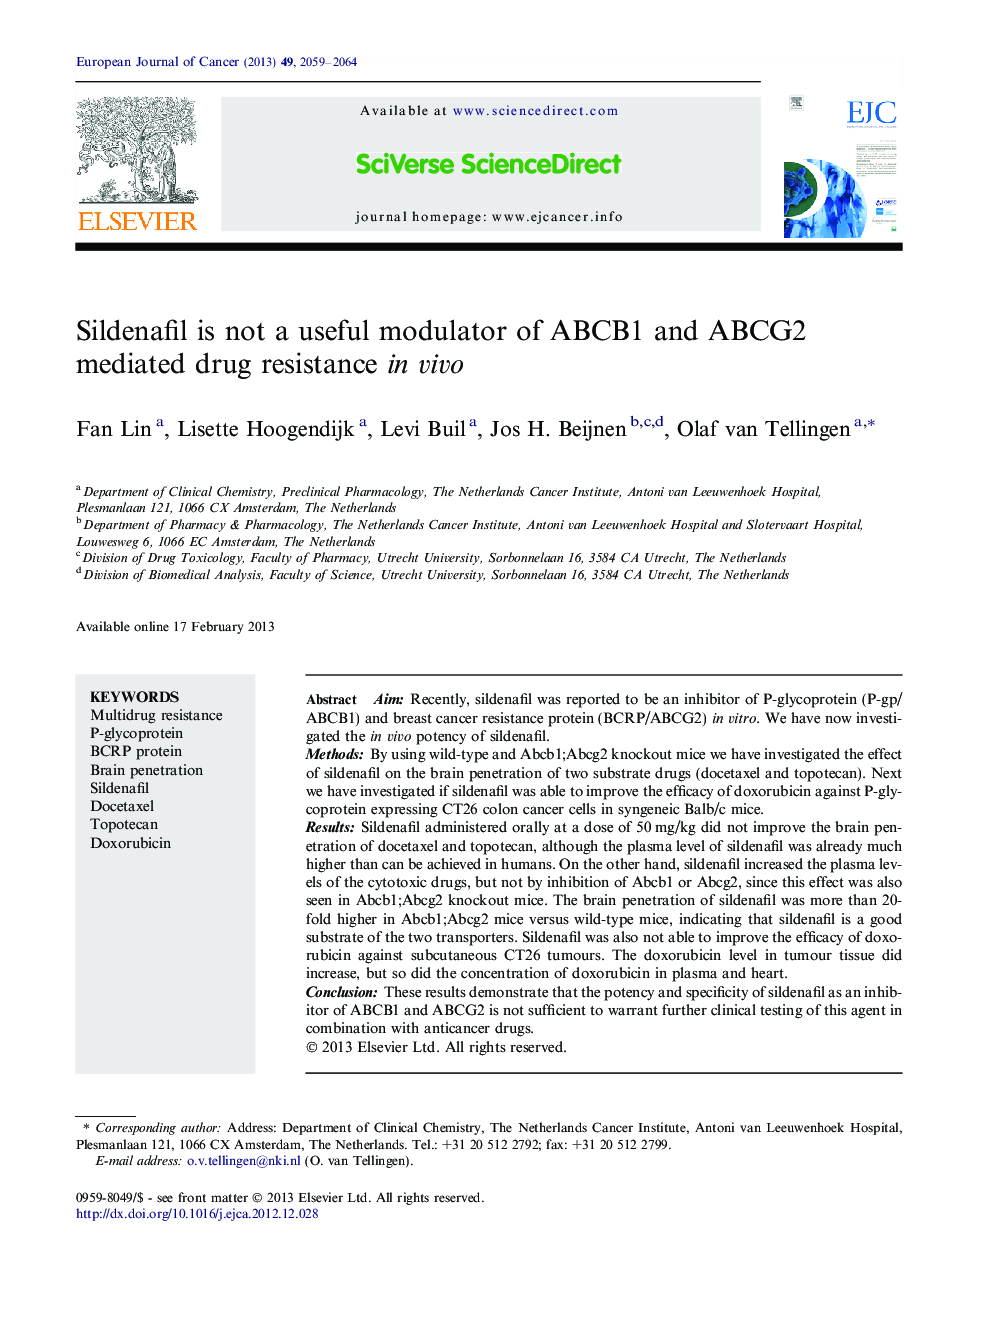 Sildenafil is not a useful modulator of ABCB1 and ABCG2 mediated drug resistance in vivo